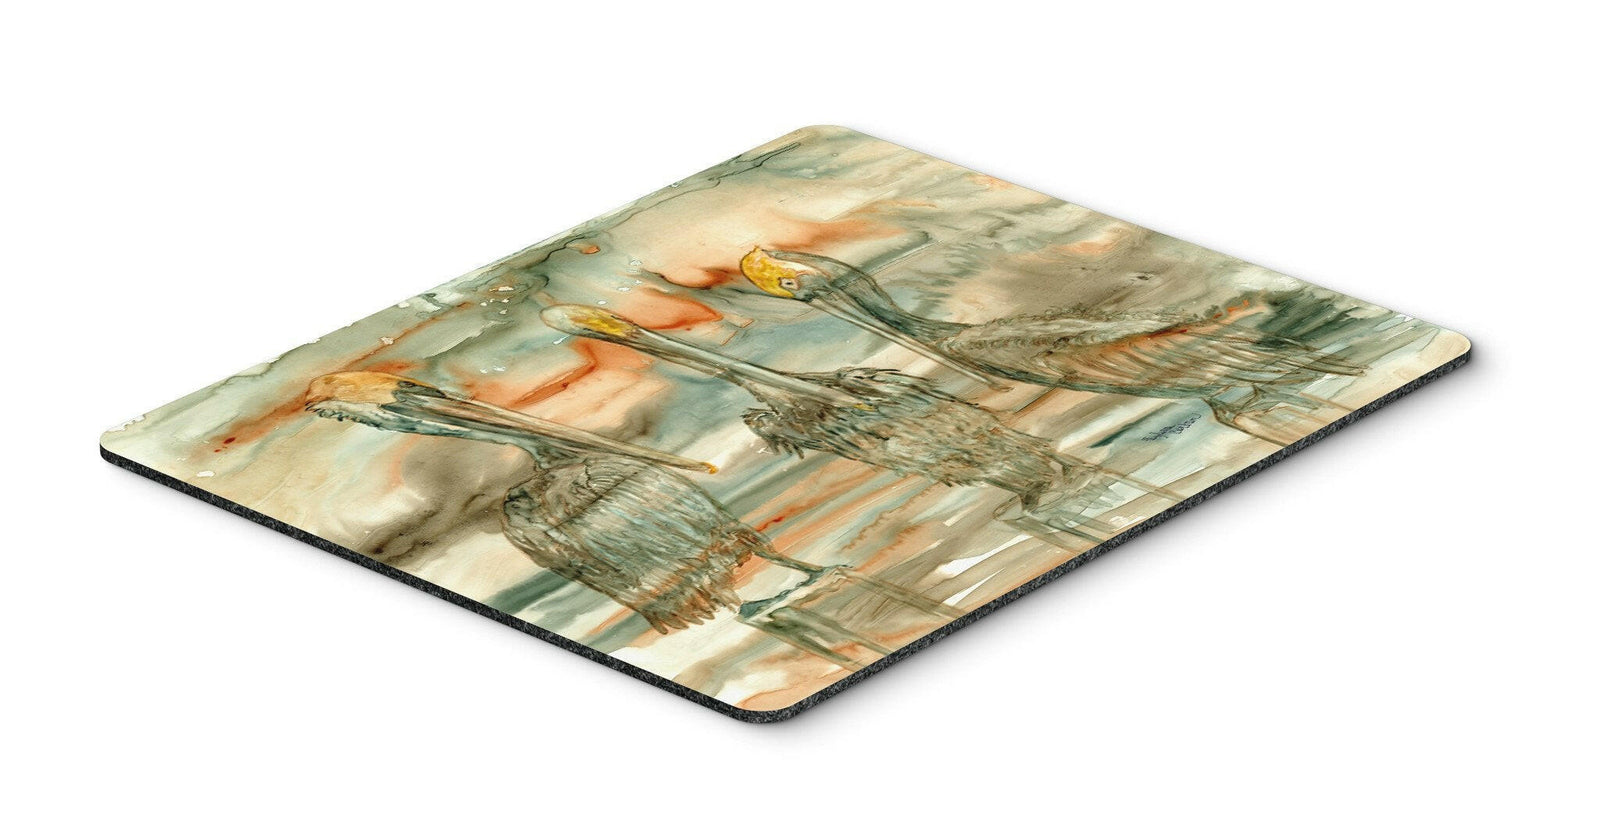 Pelicans on their perch Abstract Mouse Pad, Hot Pad or Trivet 8980MP by Caroline's Treasures